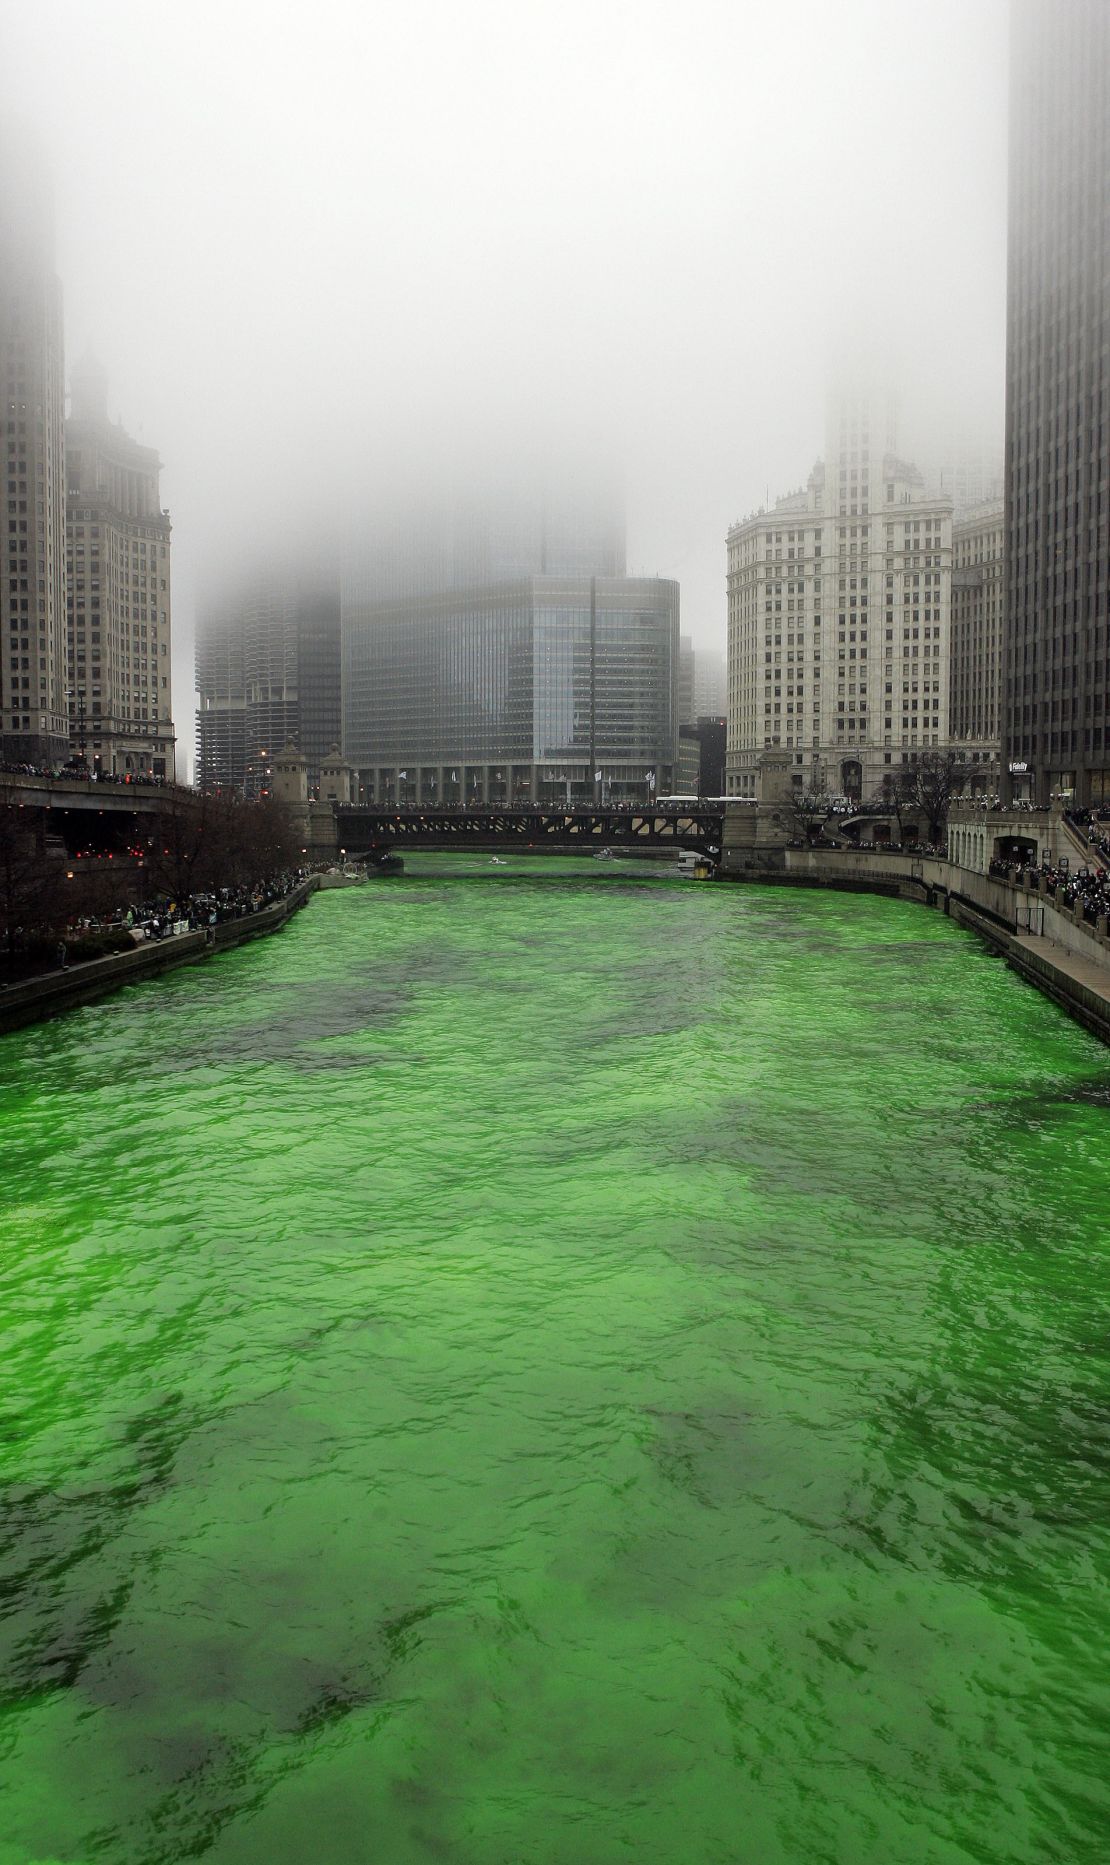 The Chicago River is dyed green for the annual St. Patrick's Day celebration.